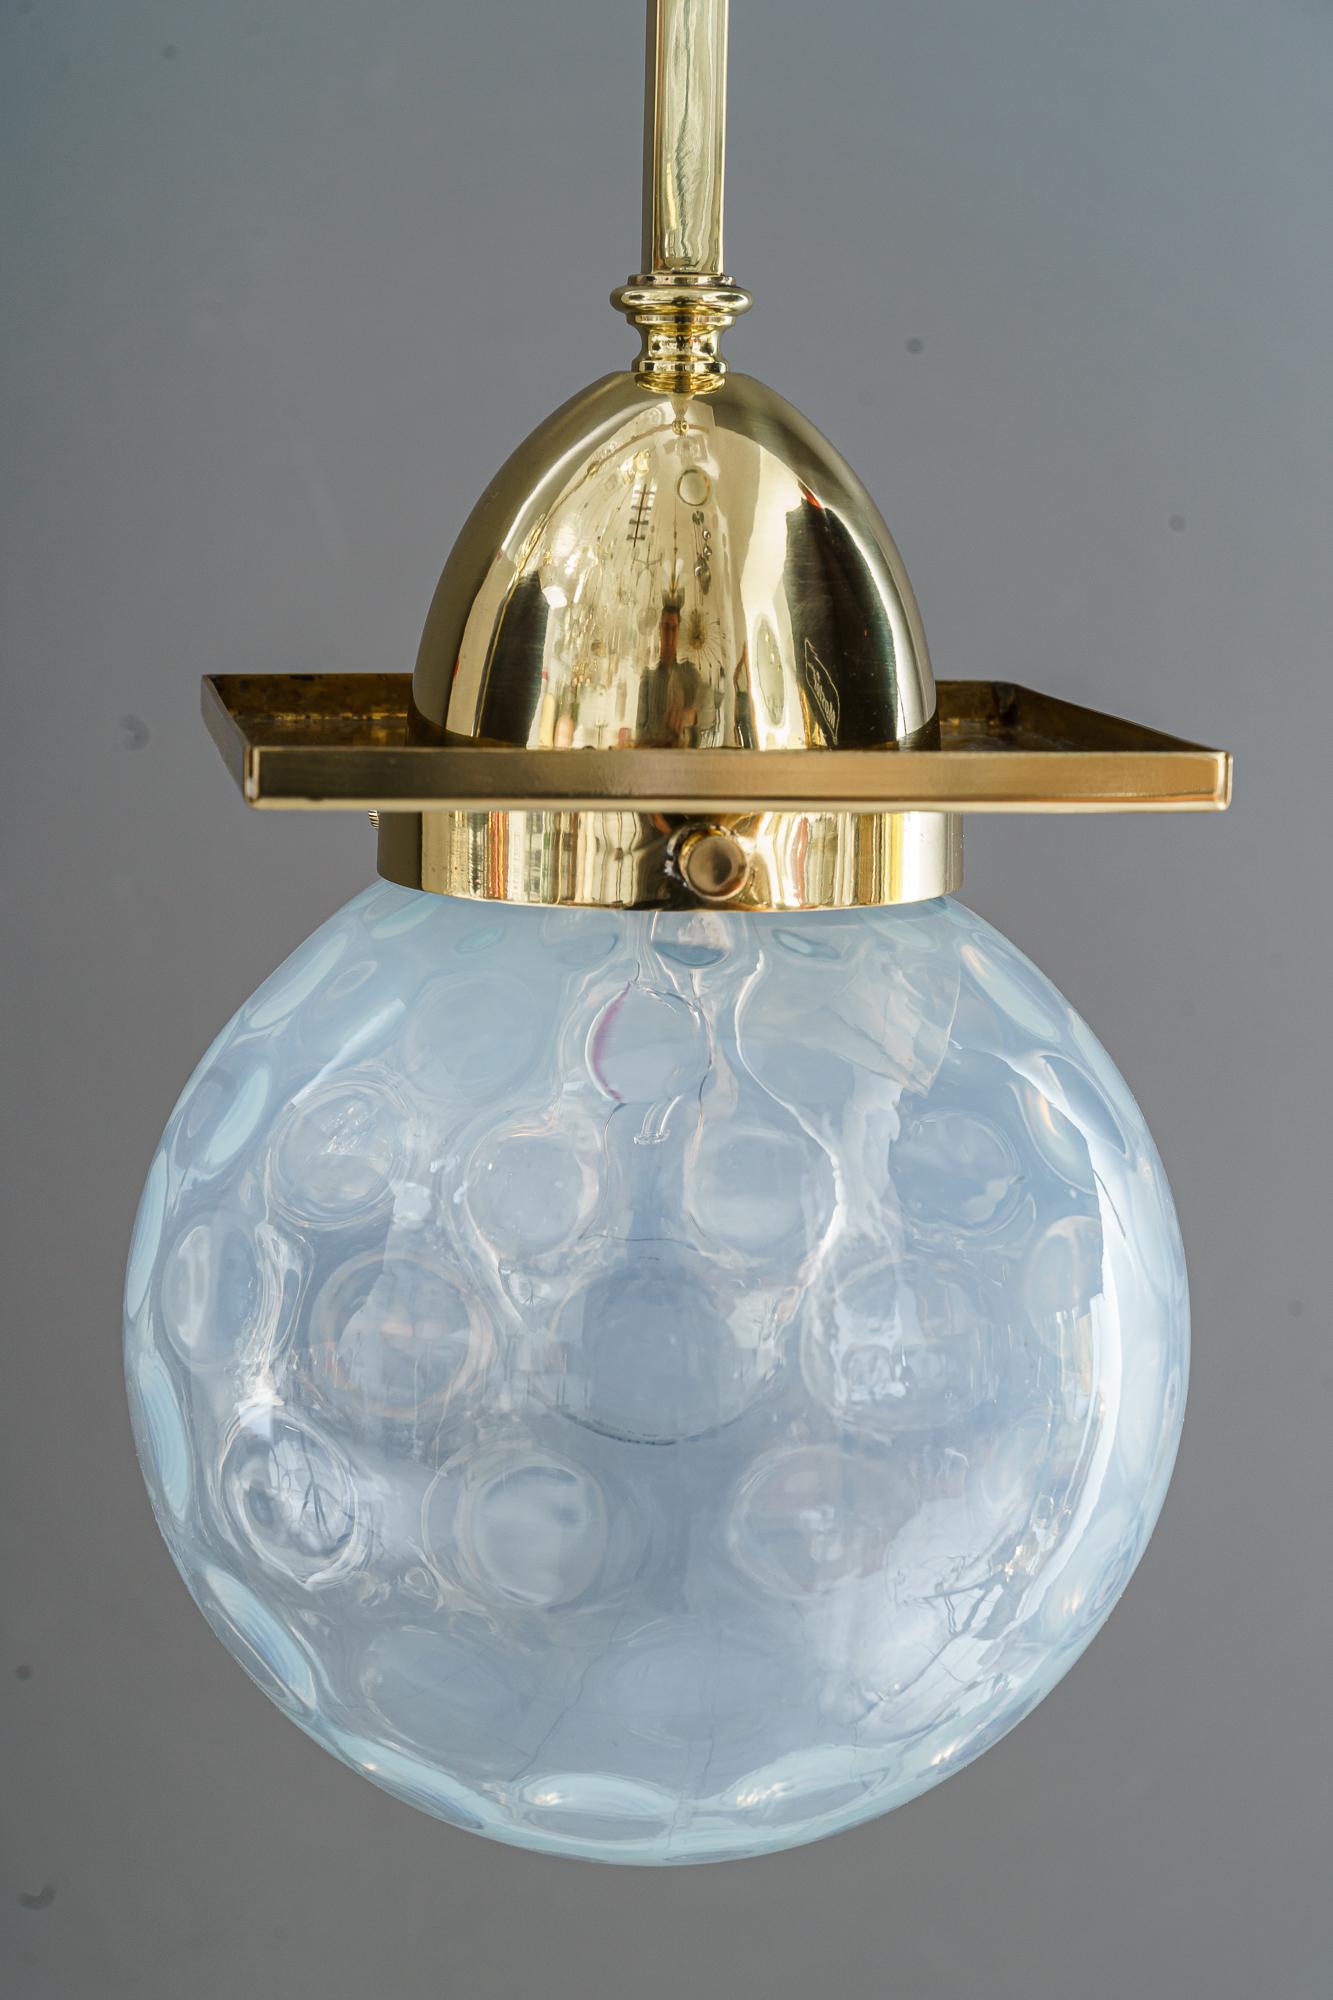 2 Art Deco ceiling lamps with original glass shades vienna around 1920s 
The glass shades were obtained and from Bohemian glass manufacturers, amongst them also the renowned enterprise Johann Loetz-Witwe Klostermuhle.
Brass polished and stove